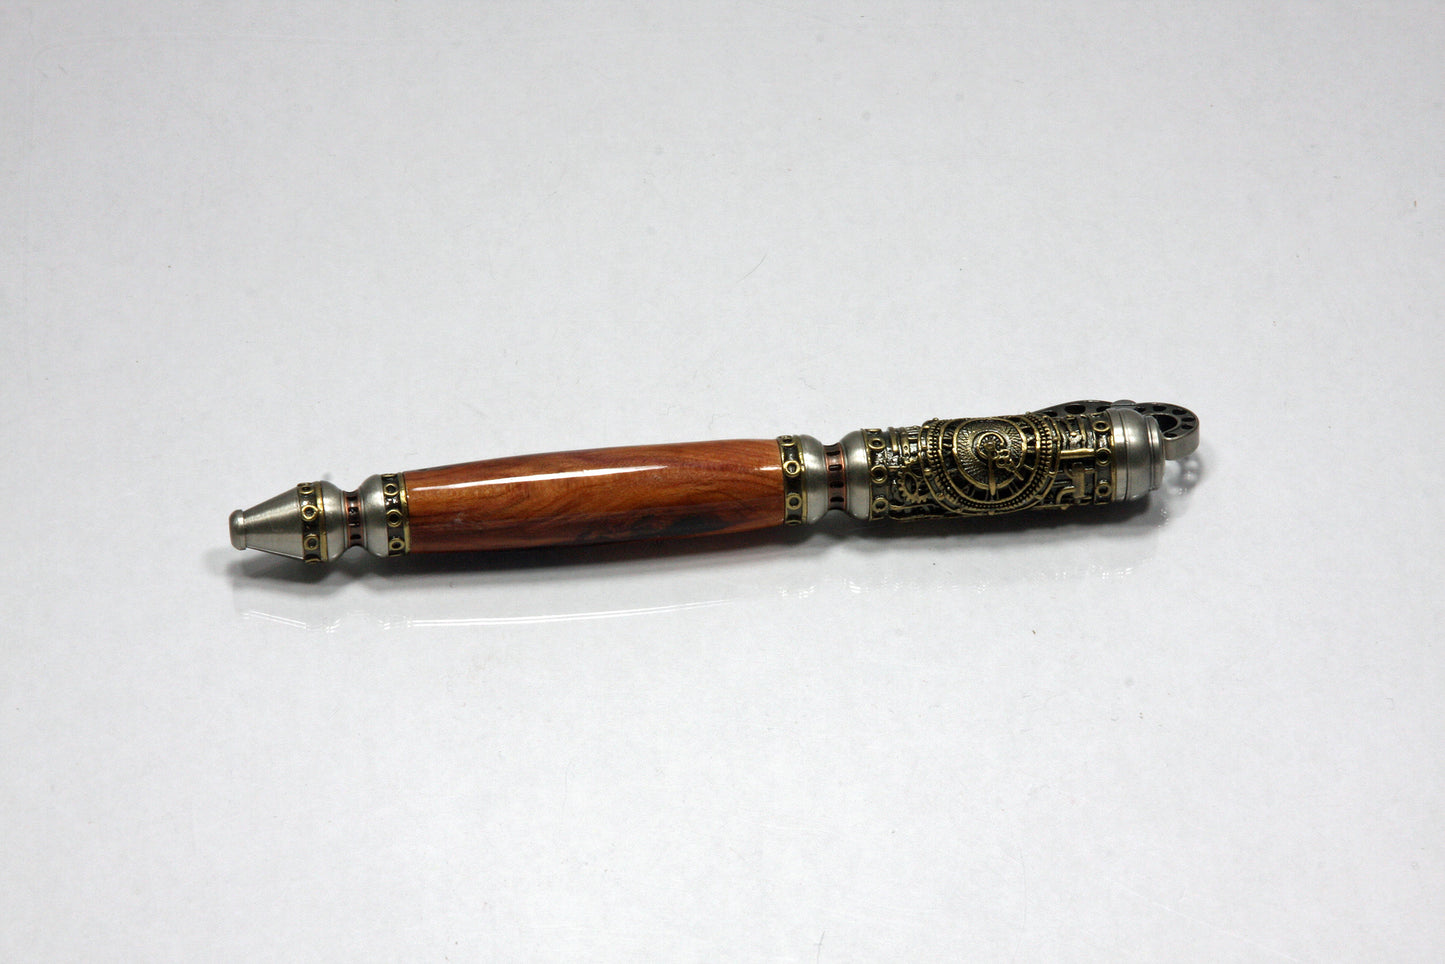 Elegant Dr. Who Steampunk Ballpoint Pen with Yew Wood Barrel